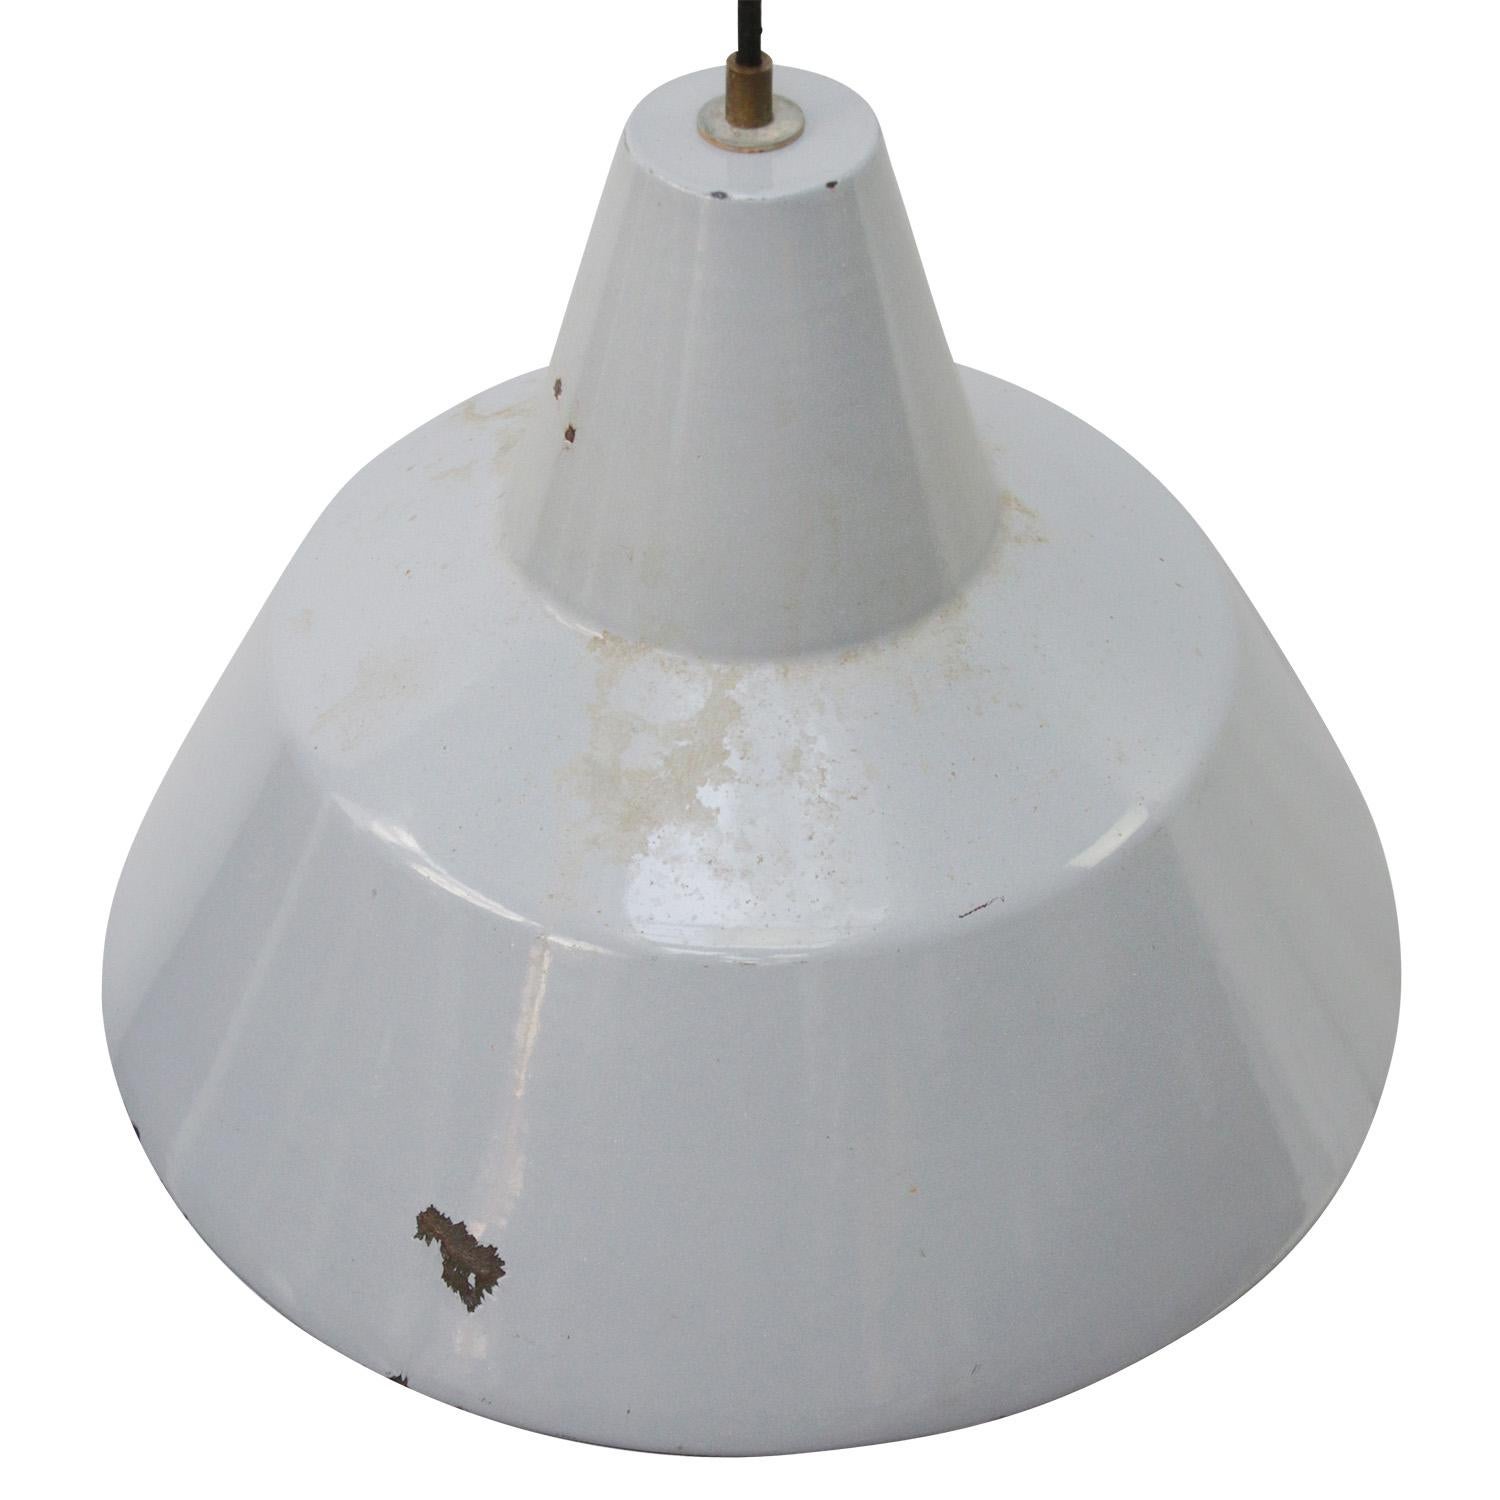 Dutch industrial hanging lamp by Philips
Grey enamel white interior

Weight: 2.10 kg / 4.6 lb

Priced per individual item. All lamps have been made suitable by international standards for incandescent light bulbs, energy-efficient and LED